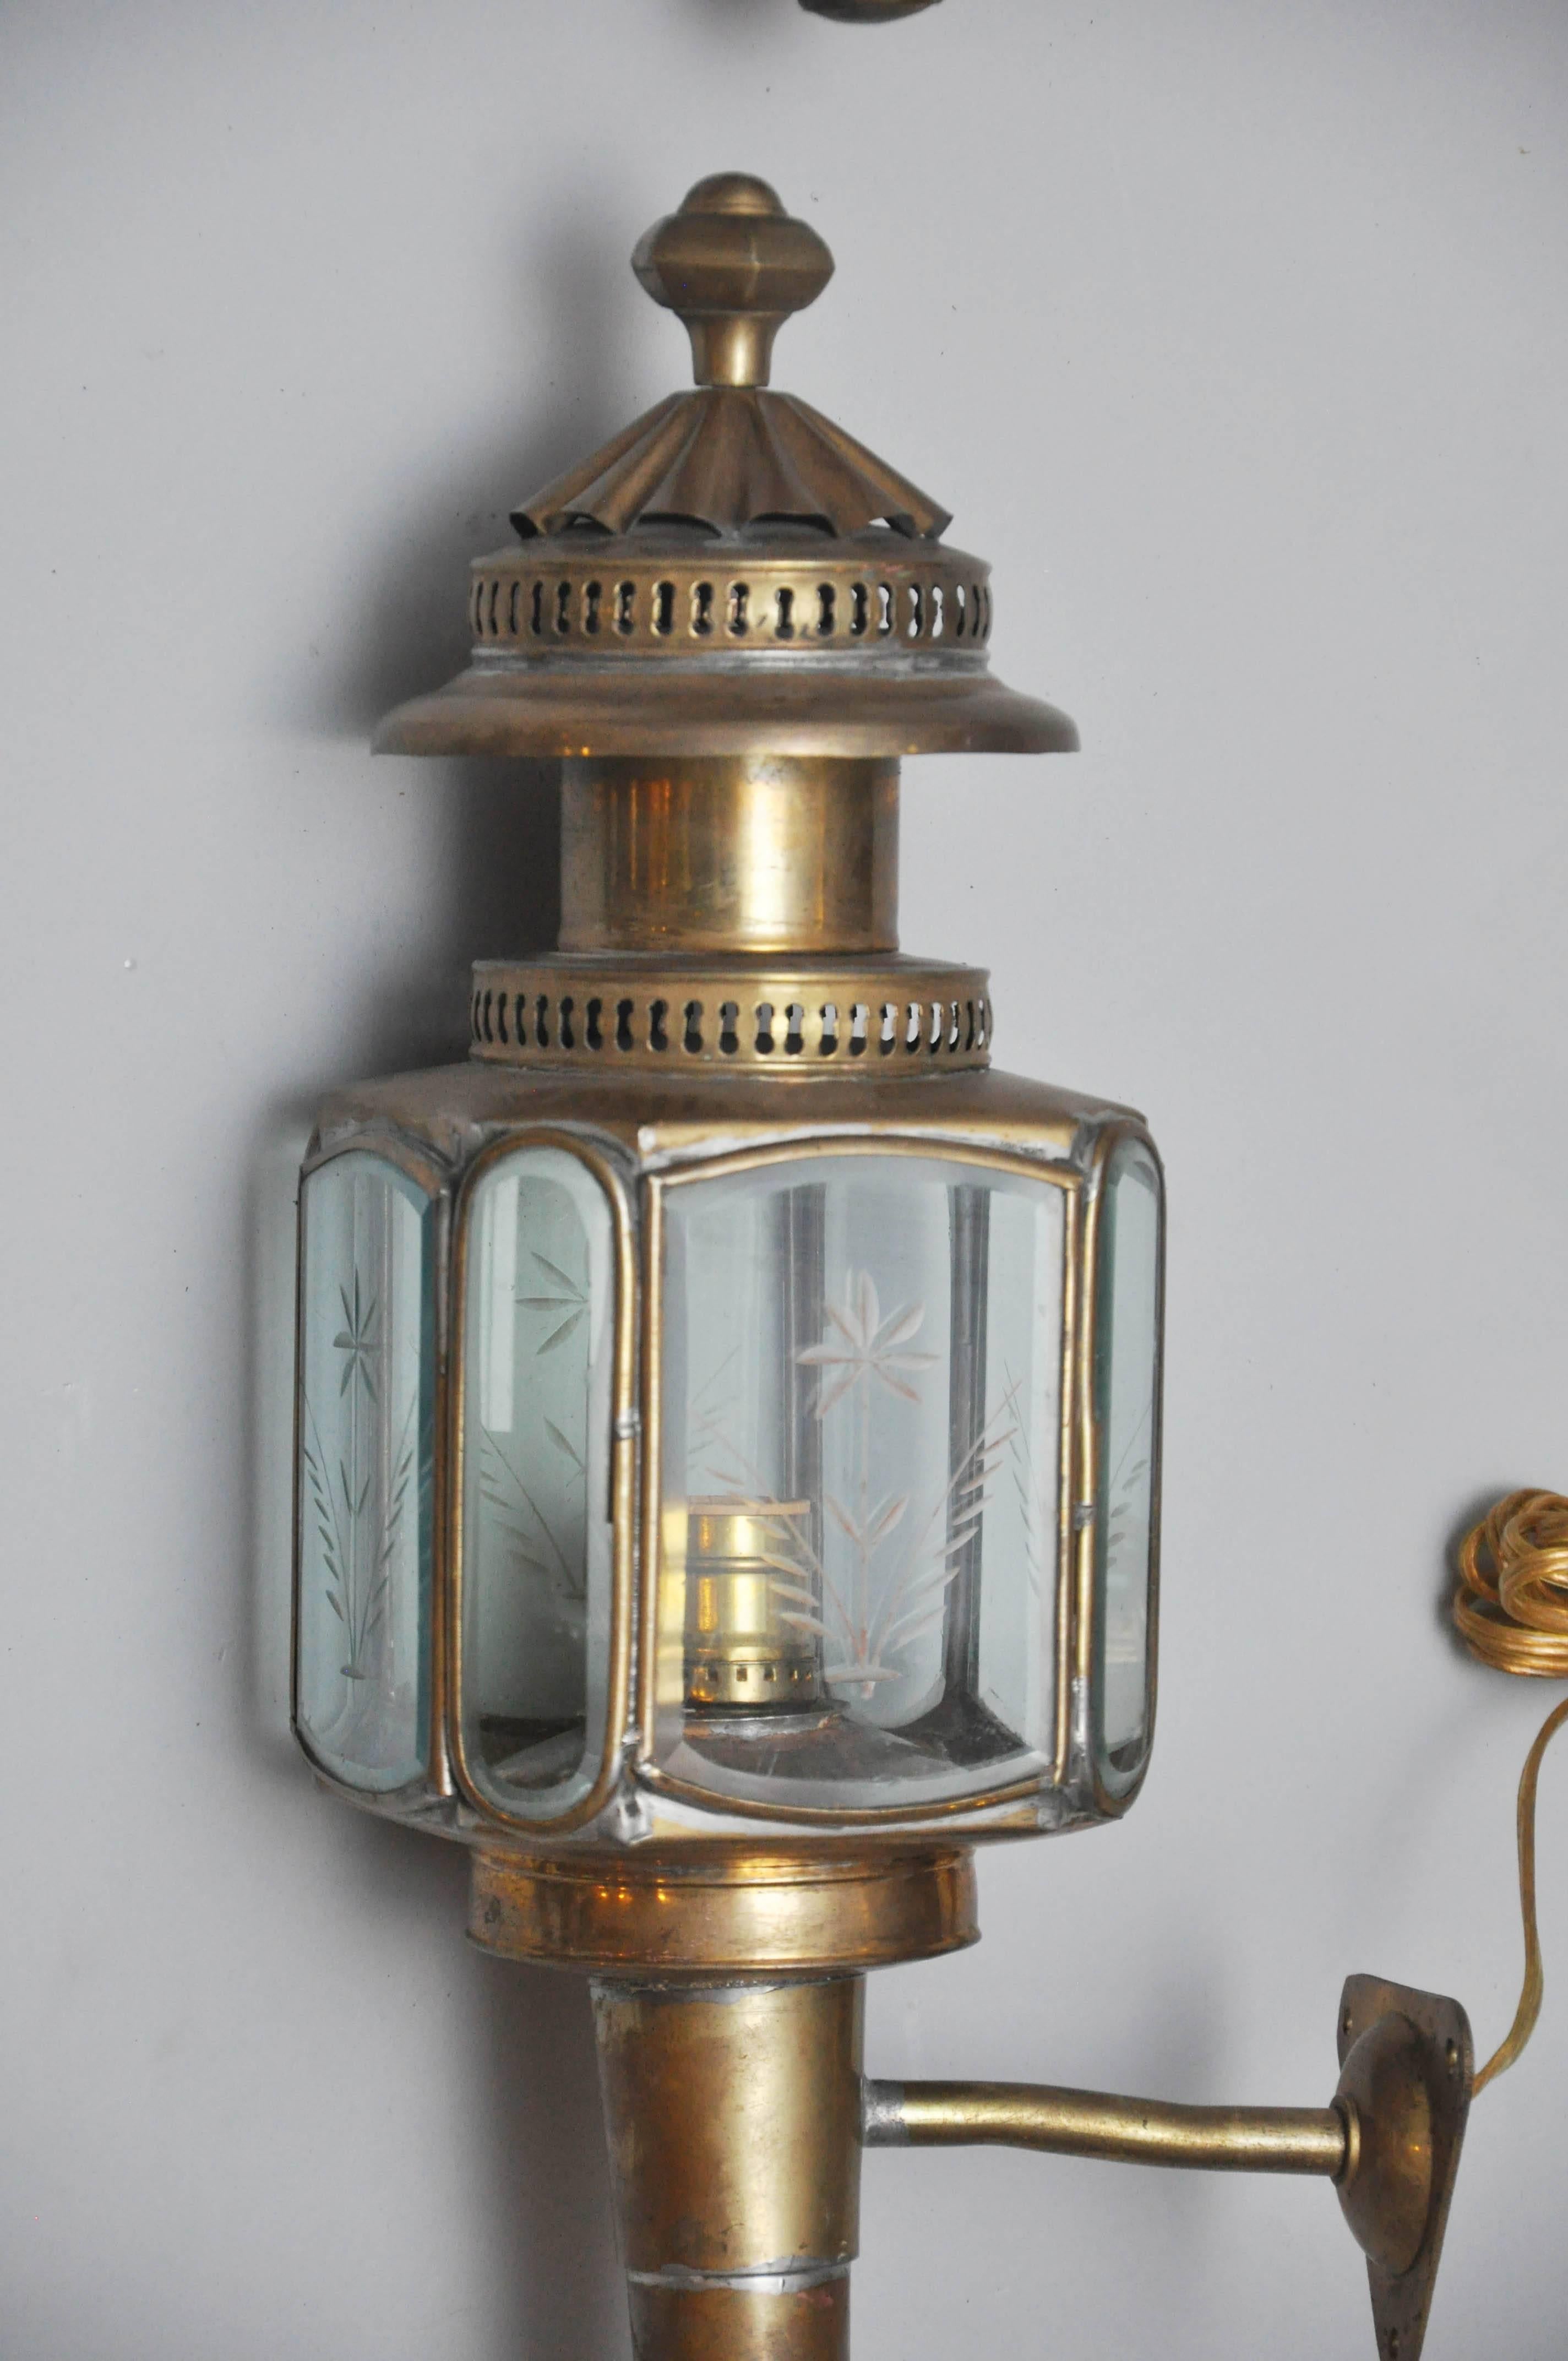 Pair of English brass carriage coach lanterns, hexagonal shaped body, five original glass panes with etched flower design, circular brass pierced roof with a finial at the crown, circular turned stem was used as an oil reservoir. Coach lights were